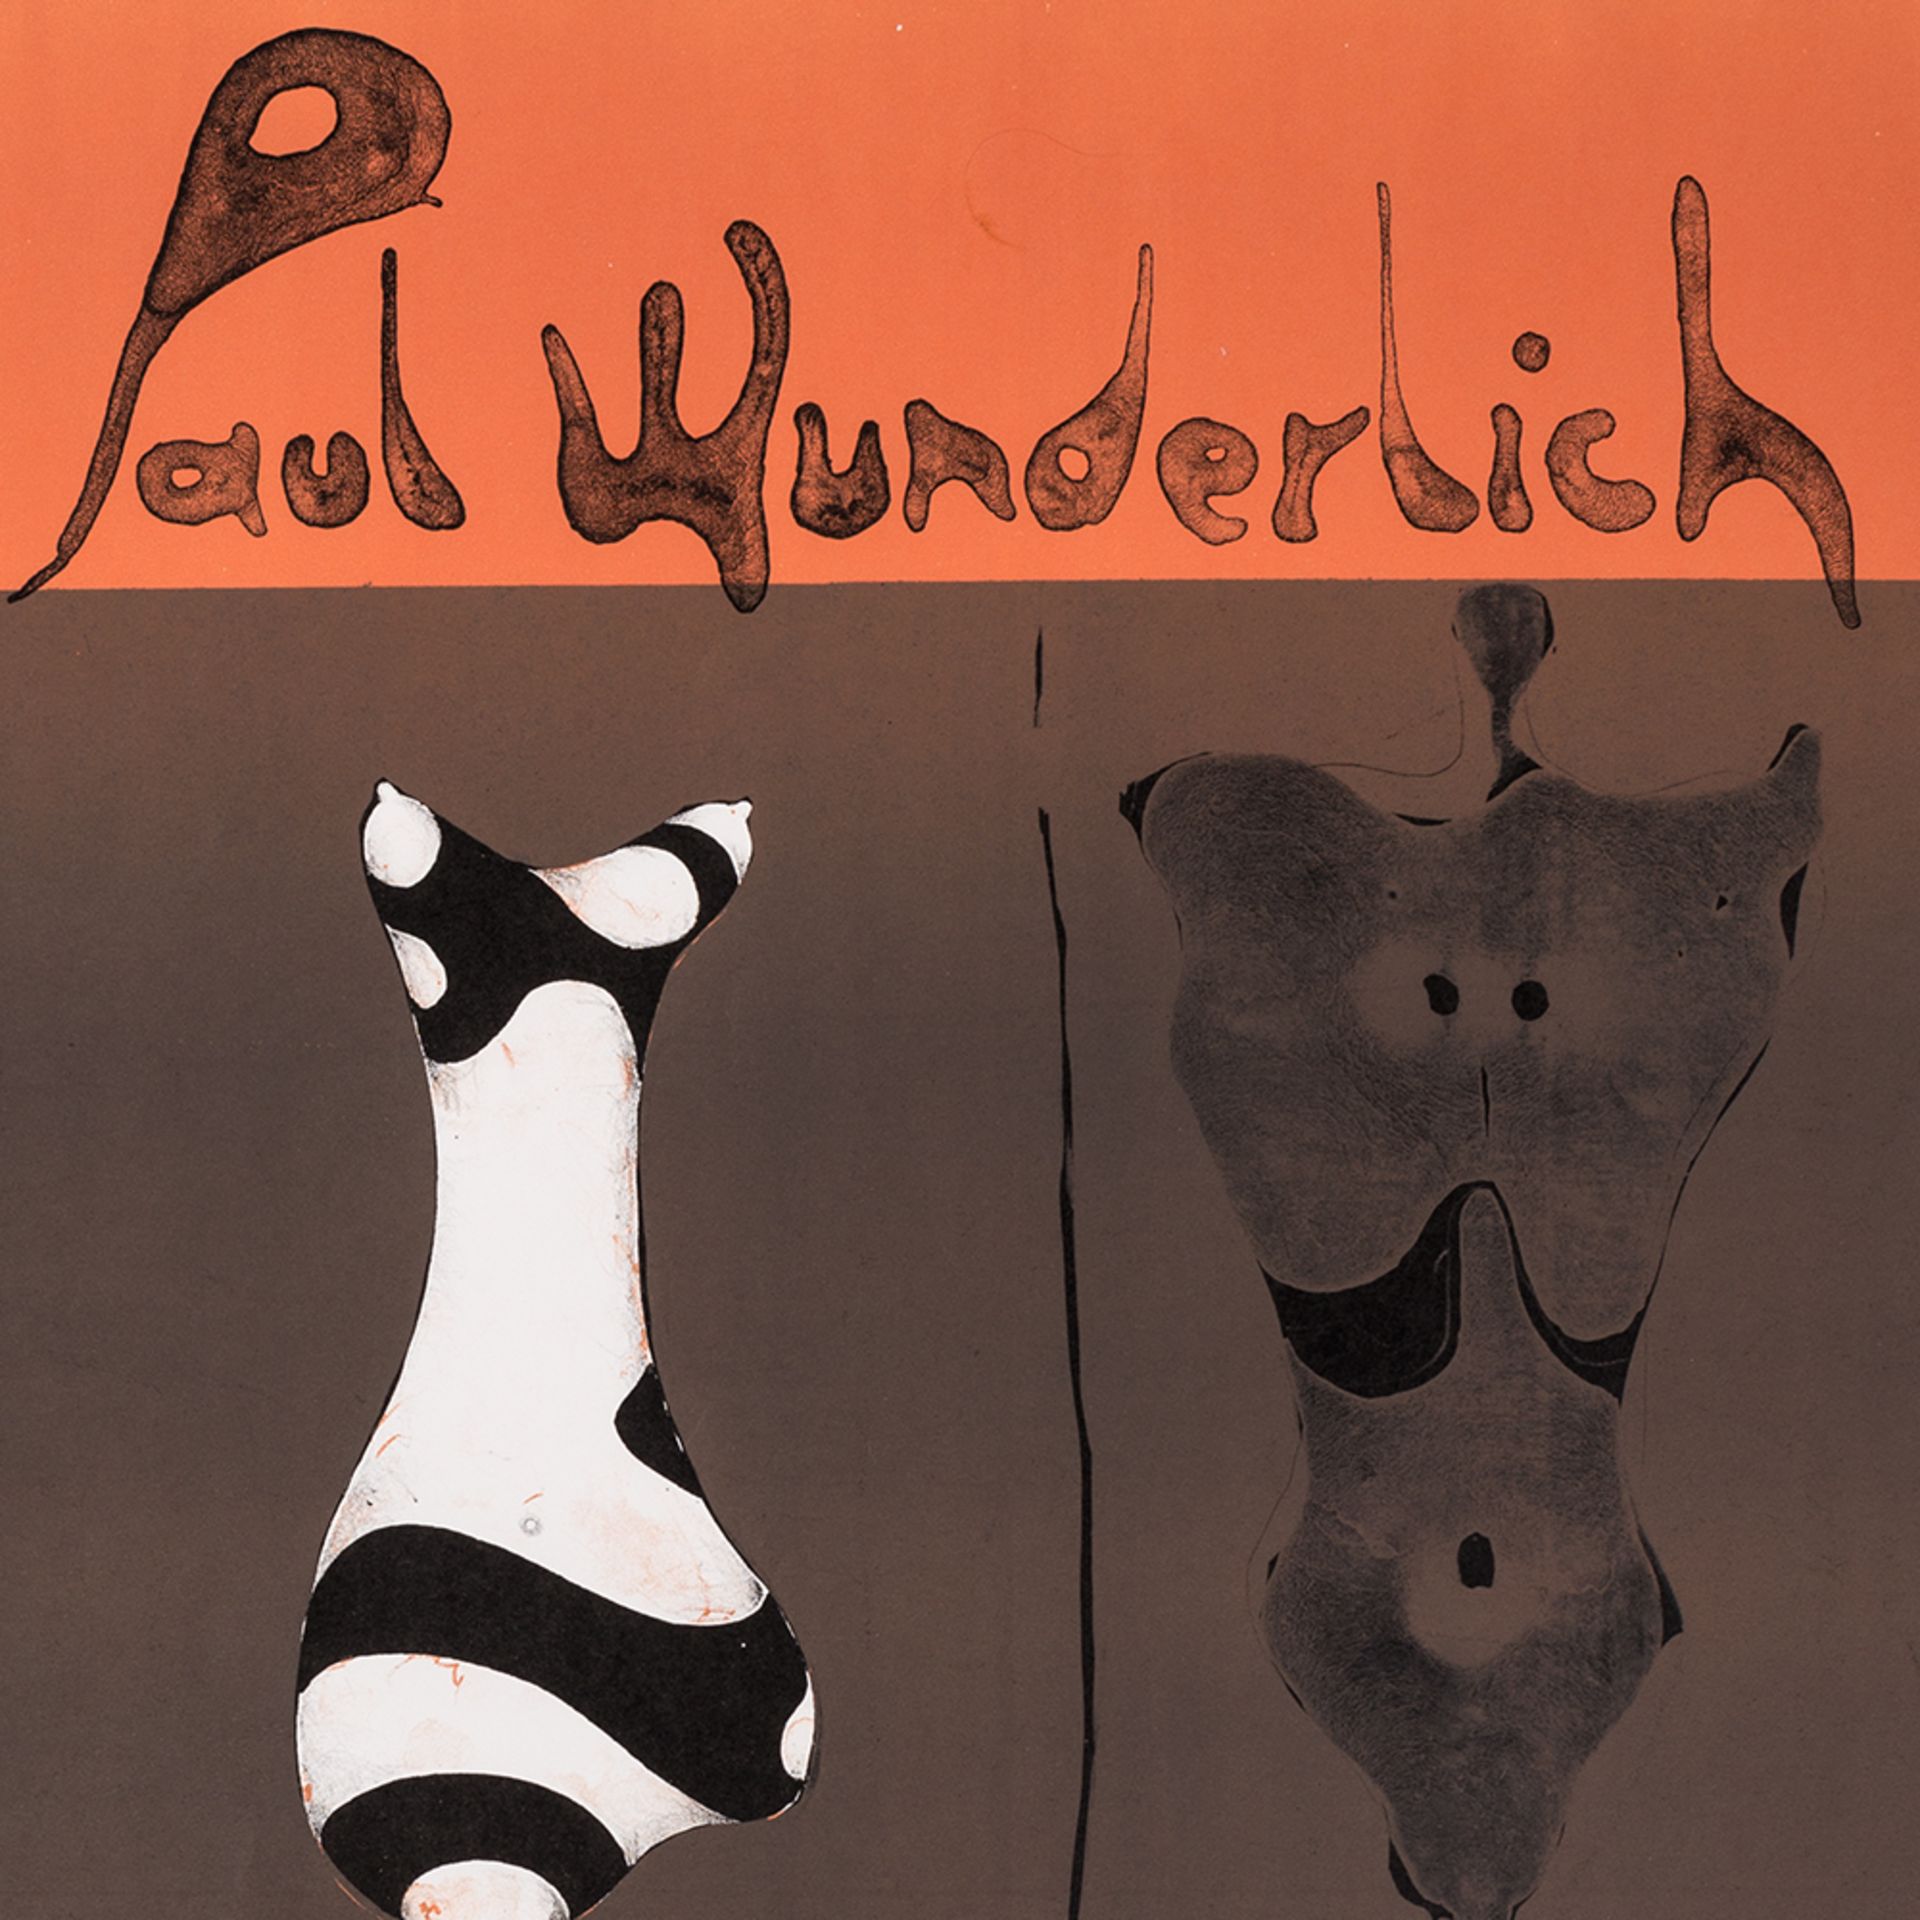 Paul Wunderlich, Poster Brusberg, Lithograph, 1965 - Image 13 of 14